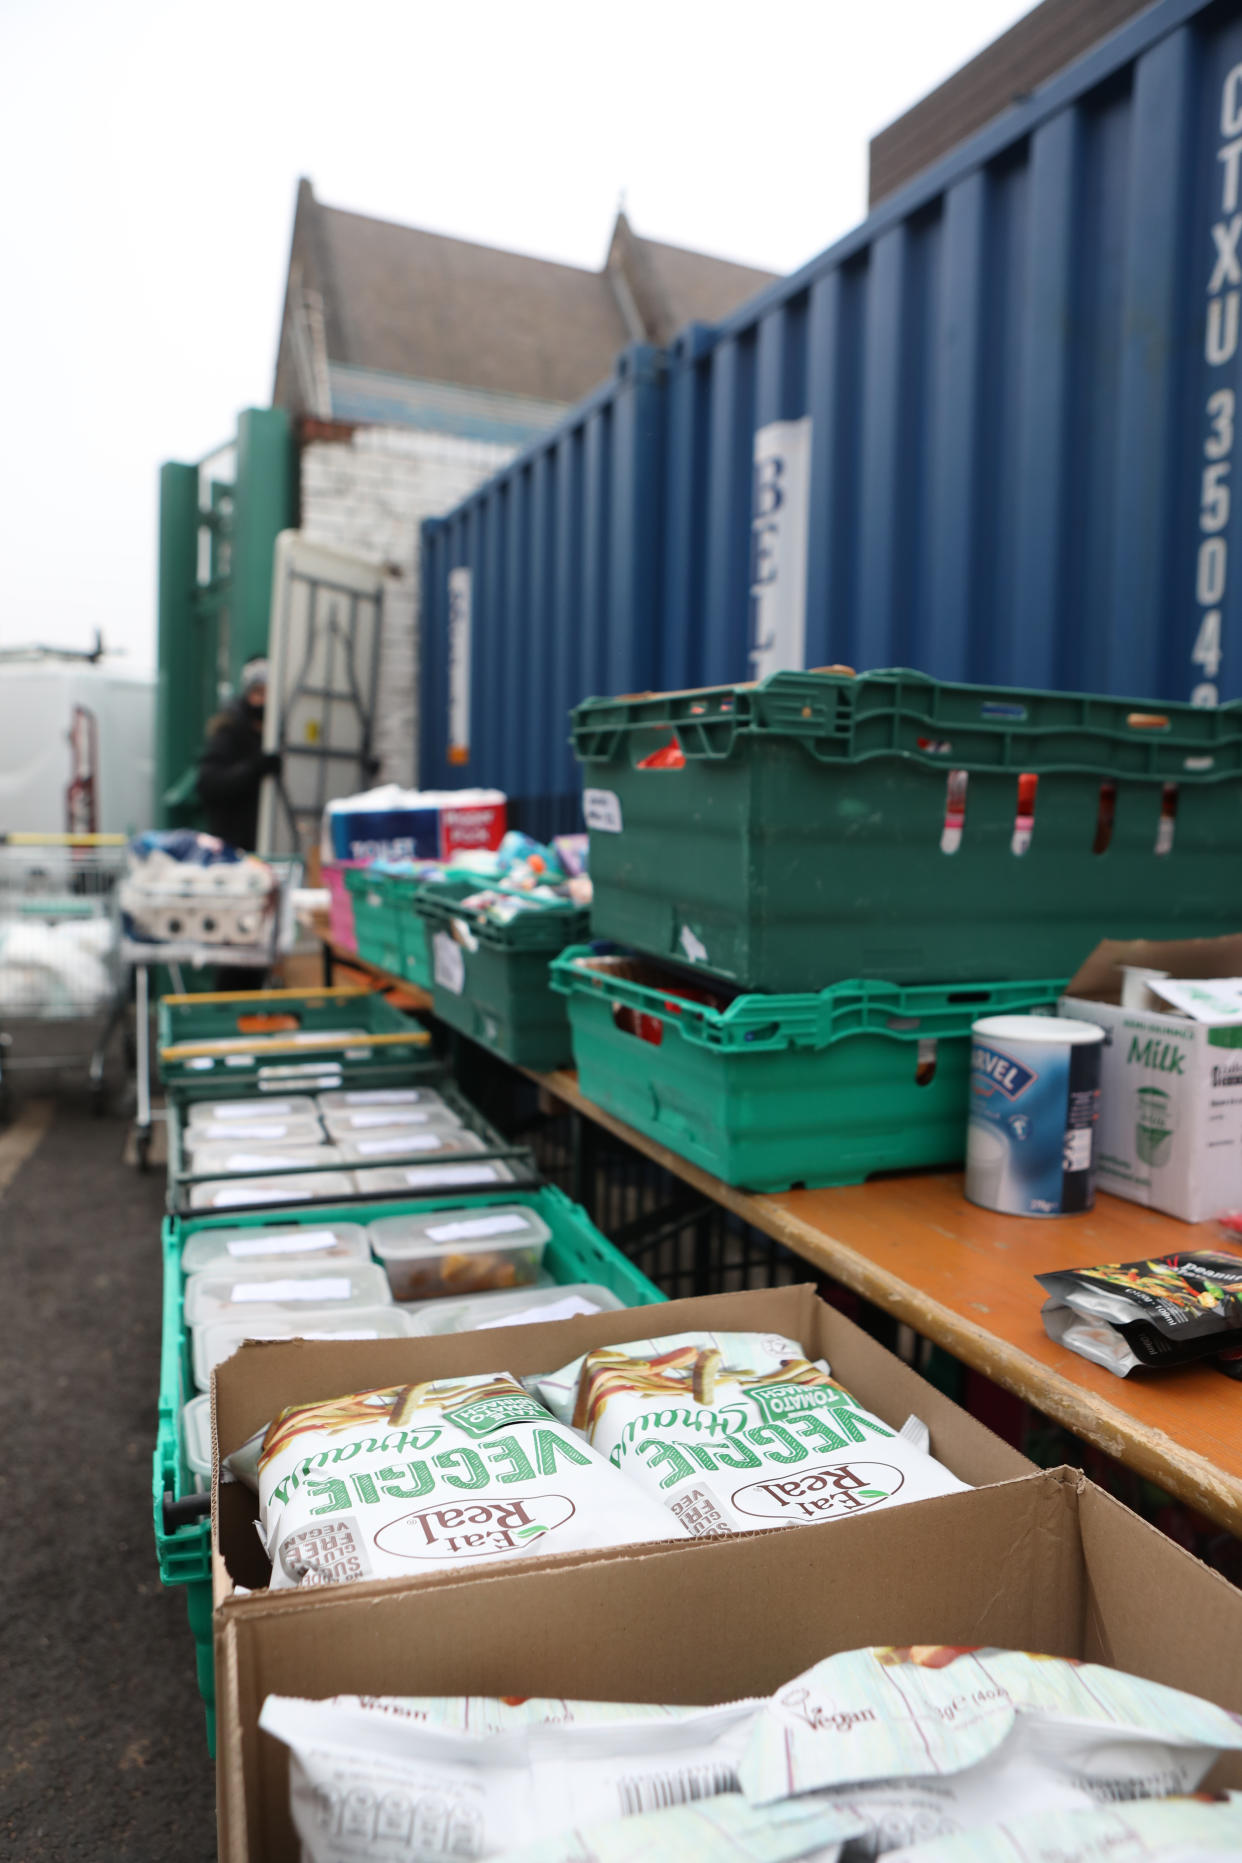 Crates at a food bank in north London. Food bank managers across the UK have warned of an accelerating food crisis as the cost of living continues to soar. (PA)